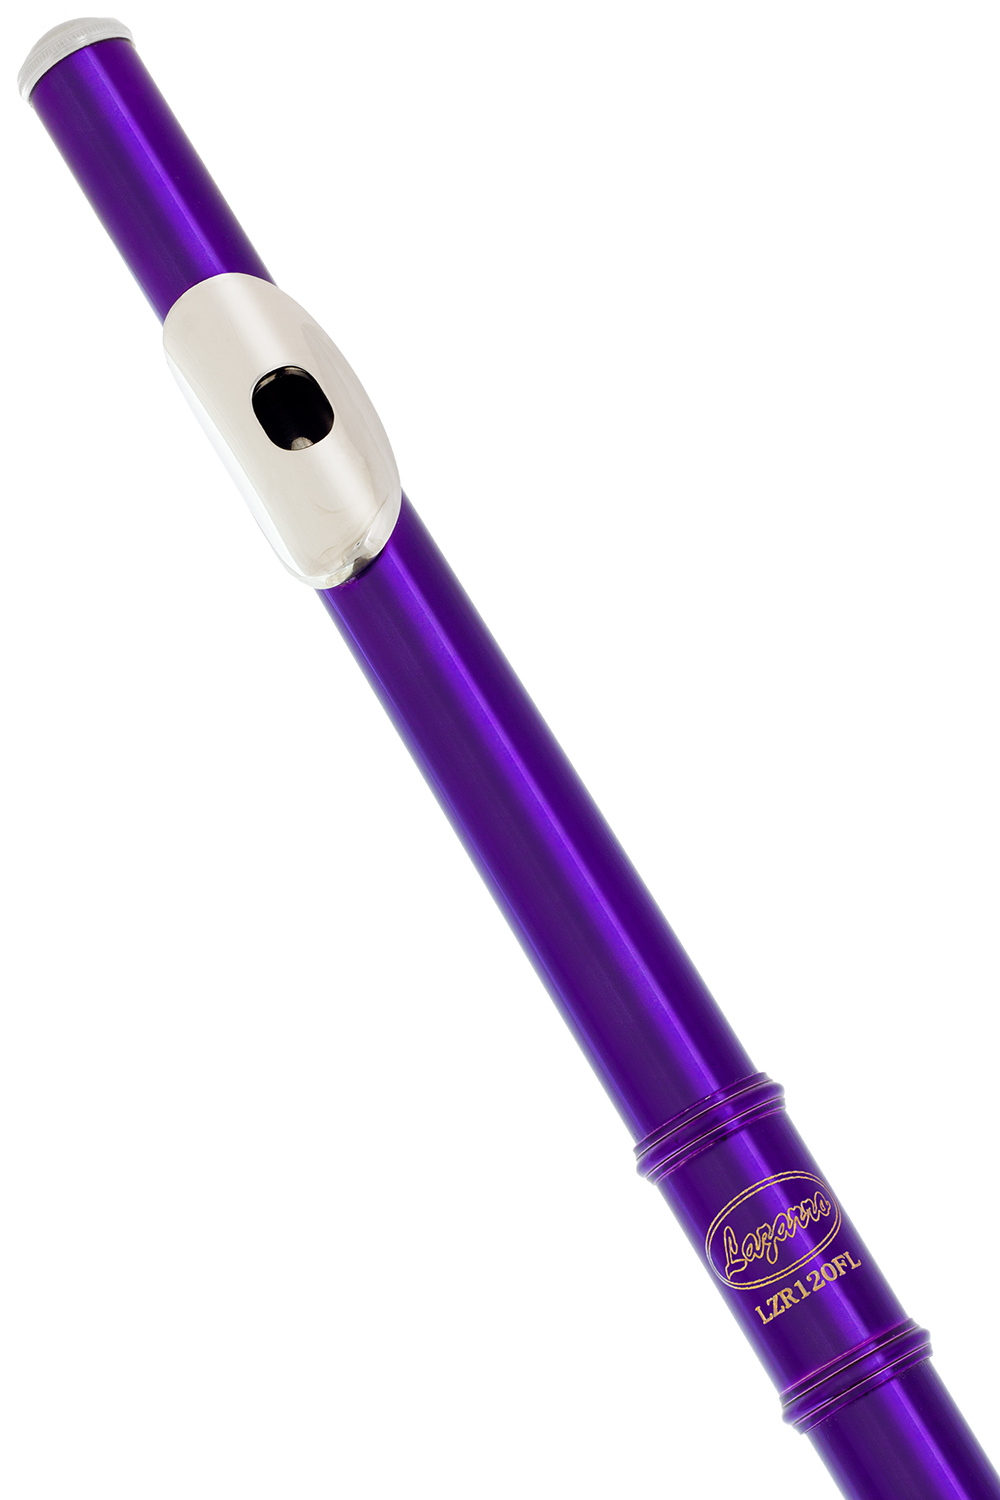 PURPLE/NICKEL Keys Closed C Flute Lazarro+Pro Case,Care Kit CLICK on LISTING to SEE All Colors 10 COLORS Available 120-PR 